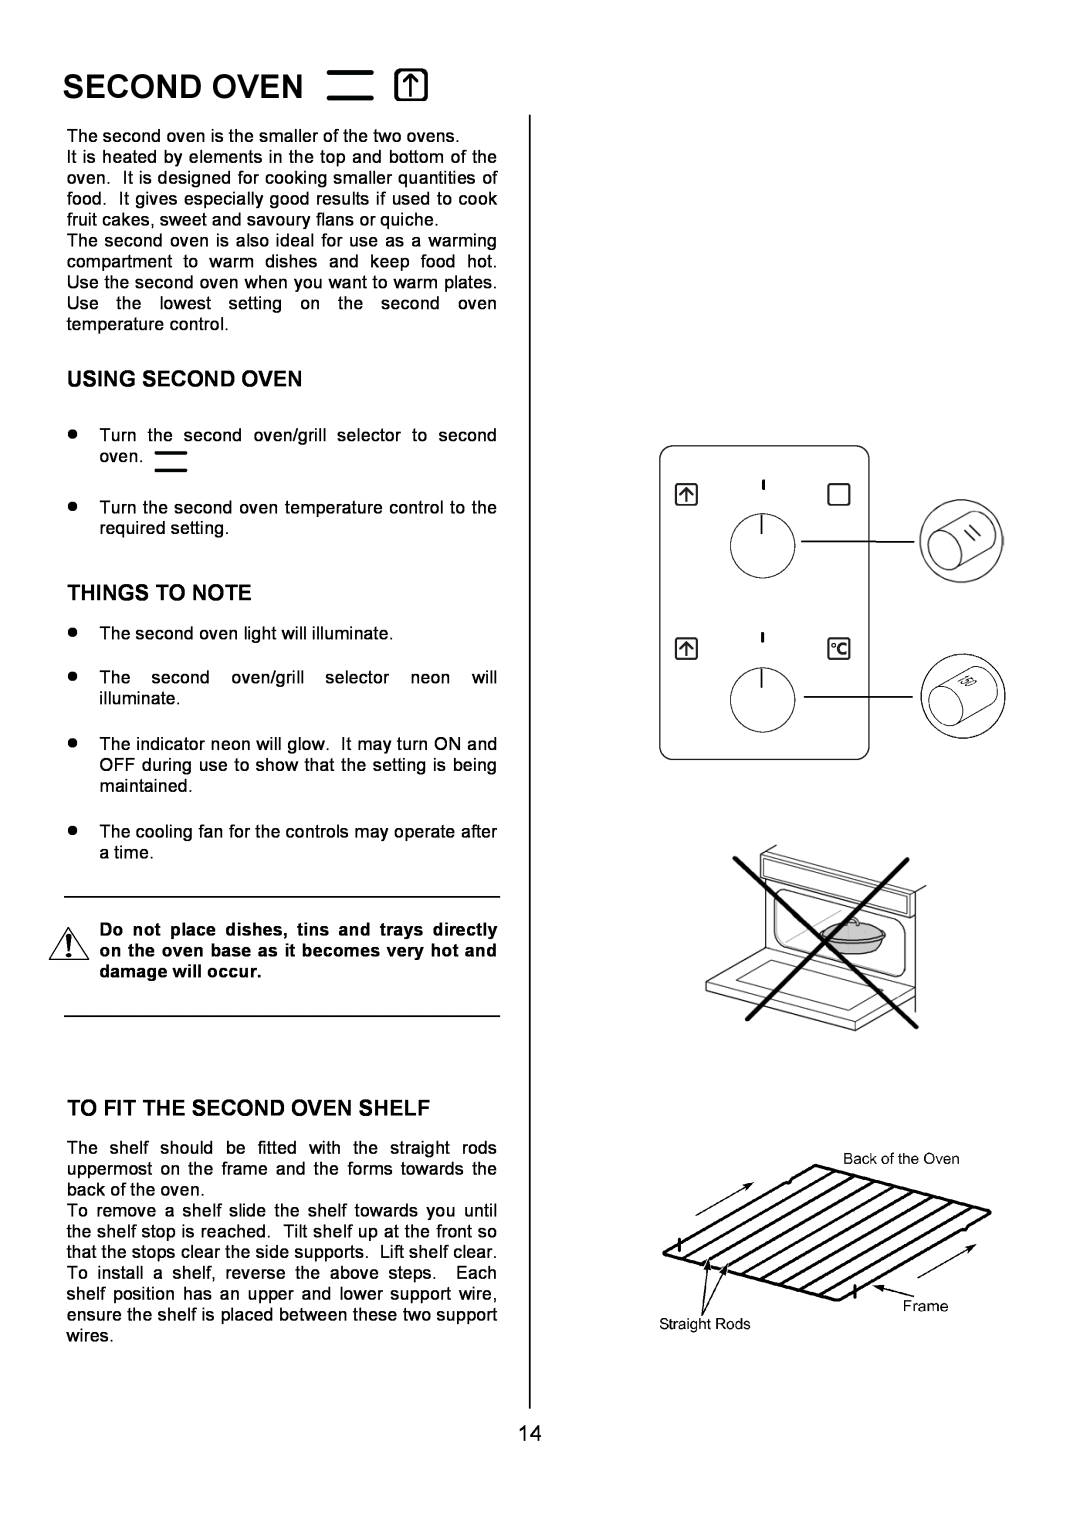 Electrolux U3100-4 manual Using Second Oven, To Fit The Second Oven Shelf, Things To Note 